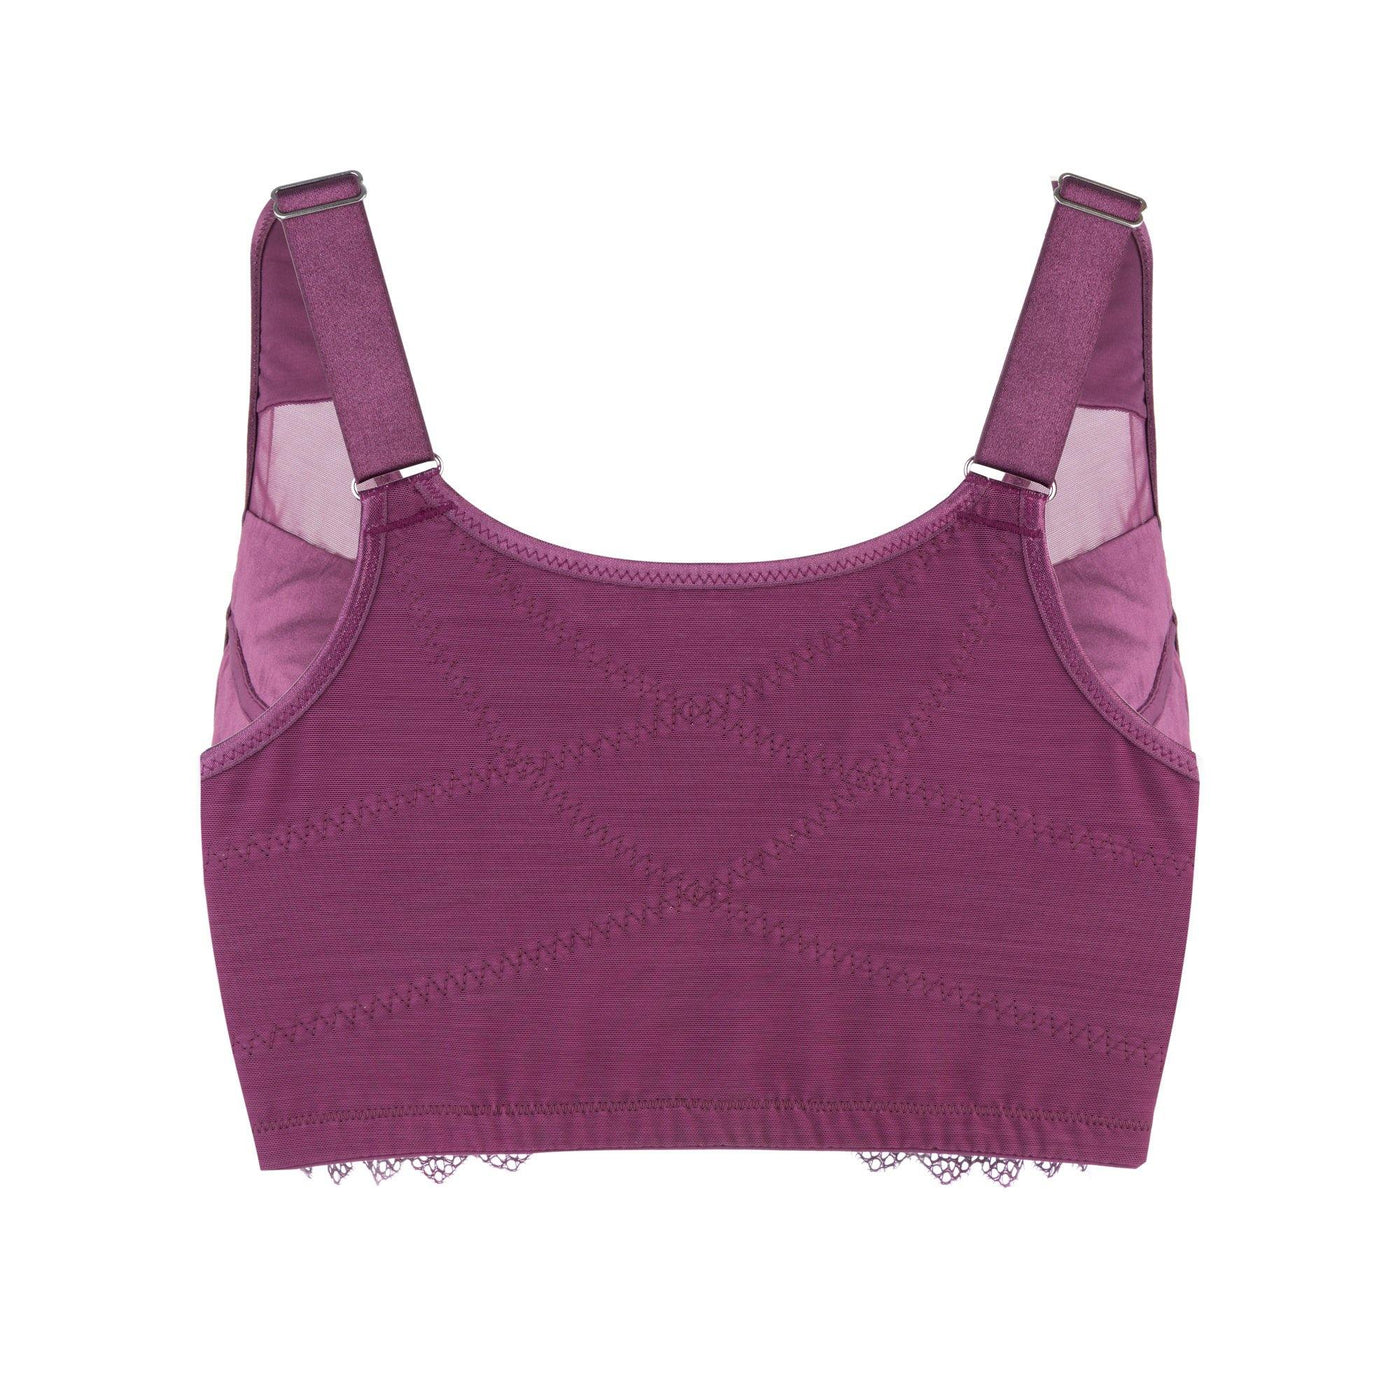 Claret Silk Back Support Cotton Sports Bra (Multiple colors available) - Juliemay Lingerie